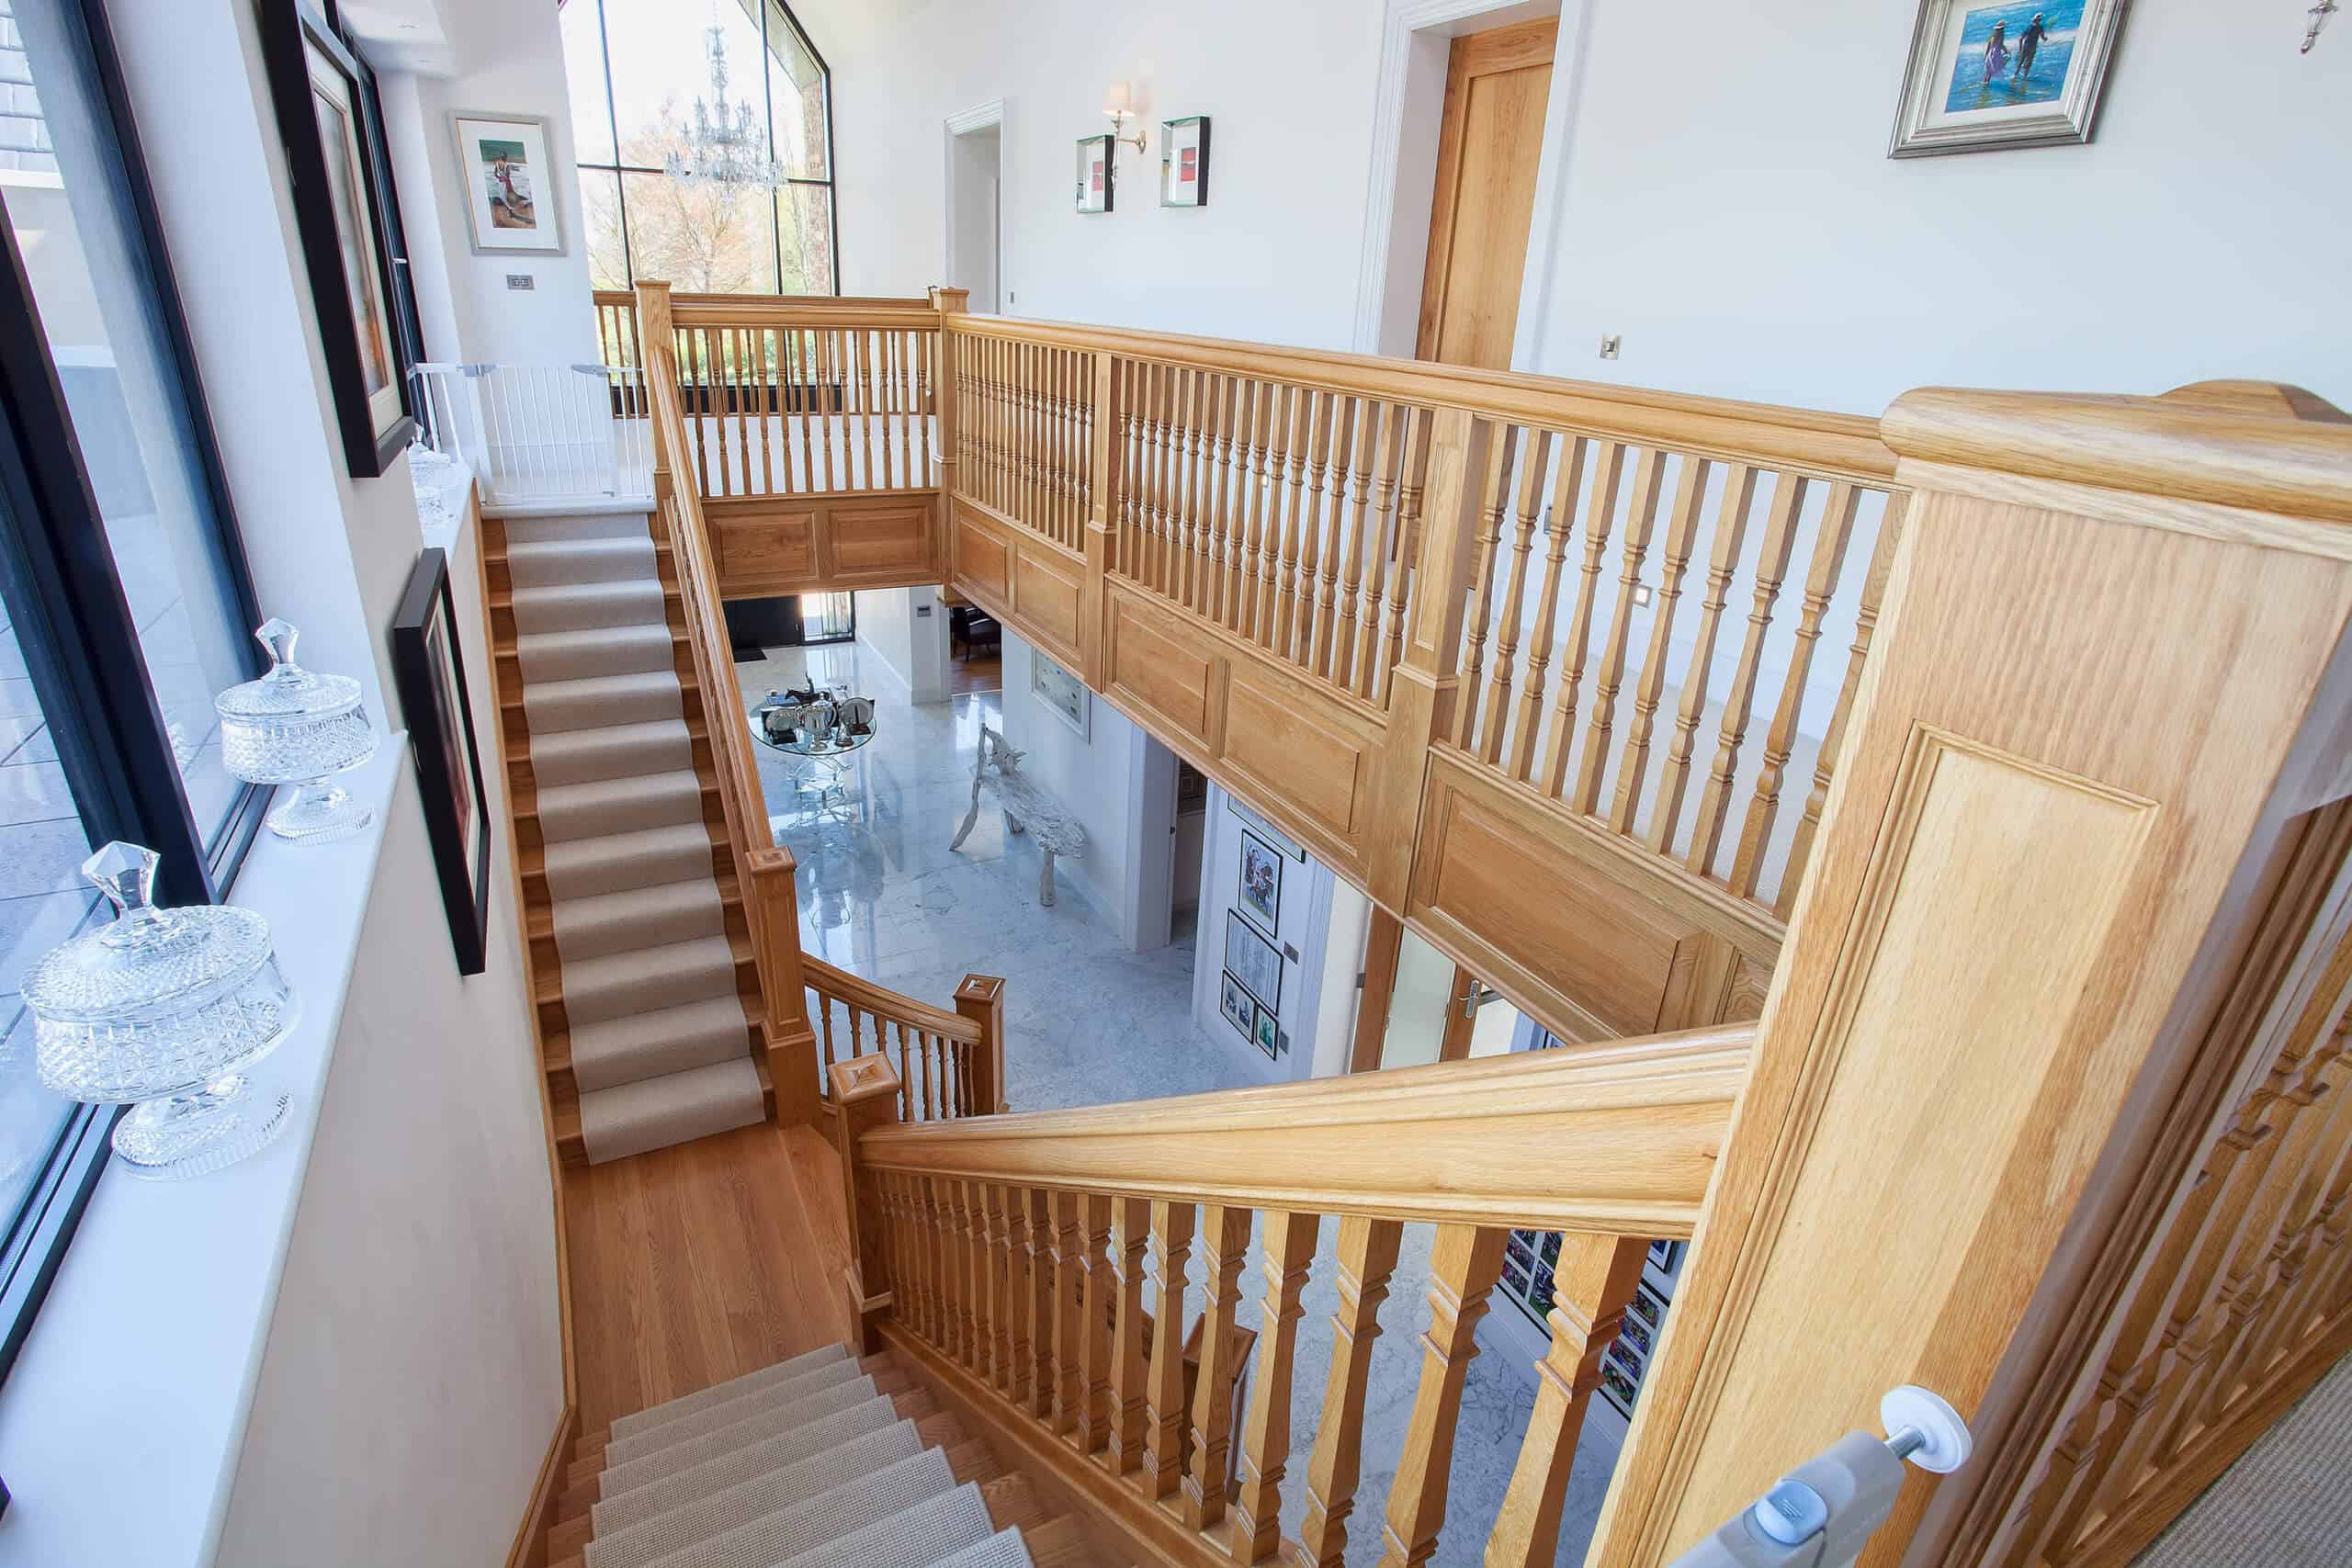 Bespoke staircase at Lambourn Woodlands residential property